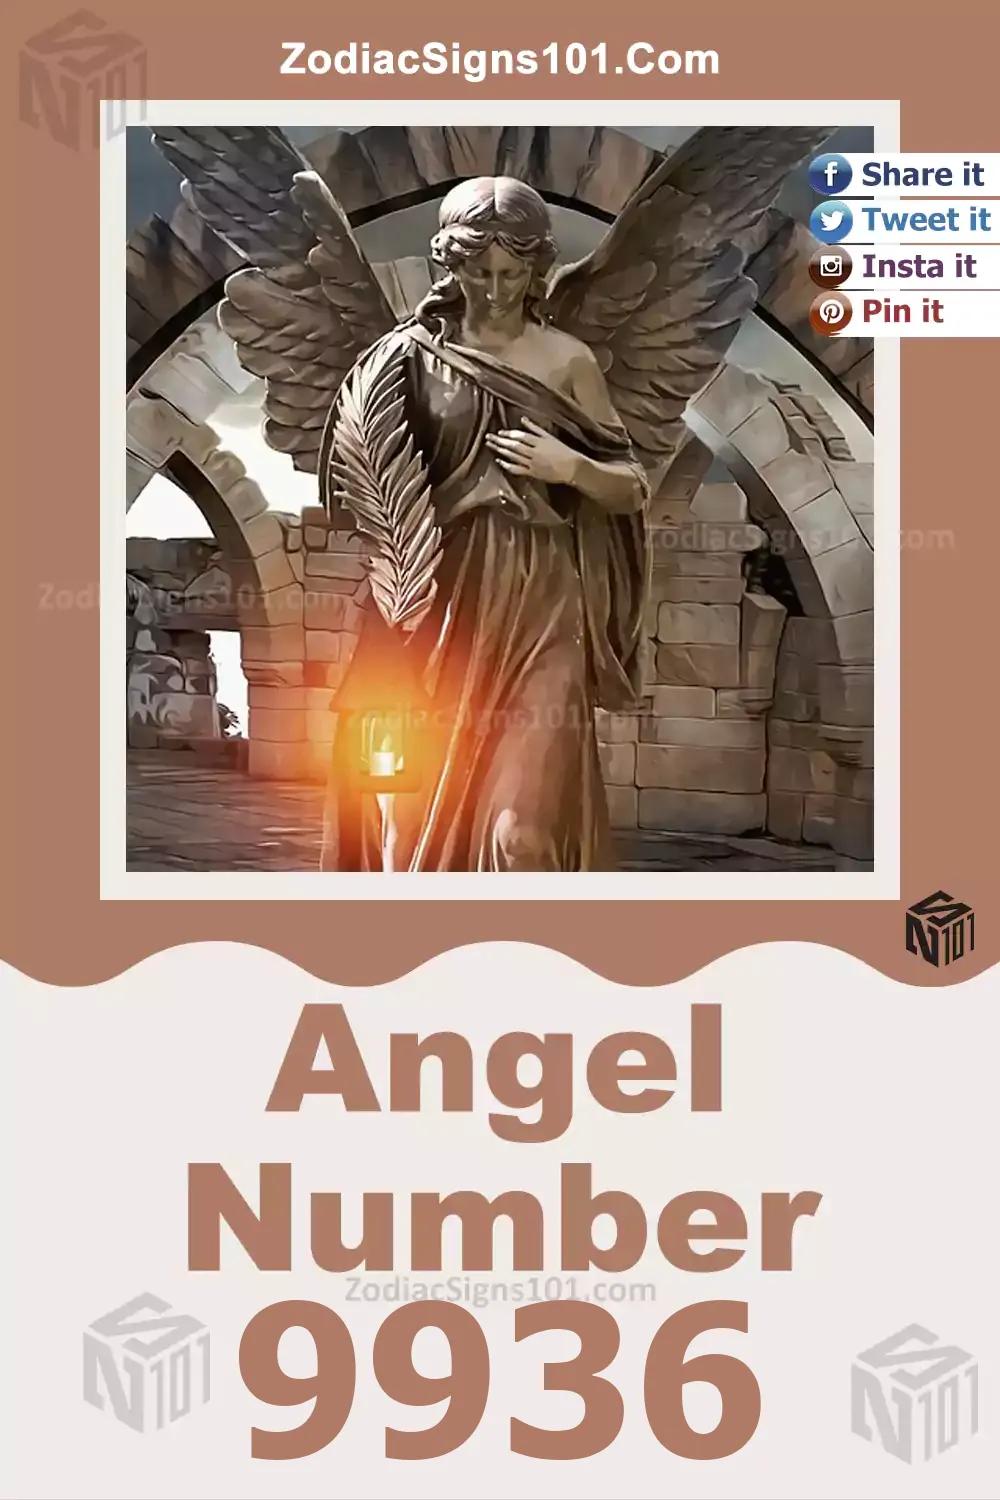 9936 Angel Number Meaning